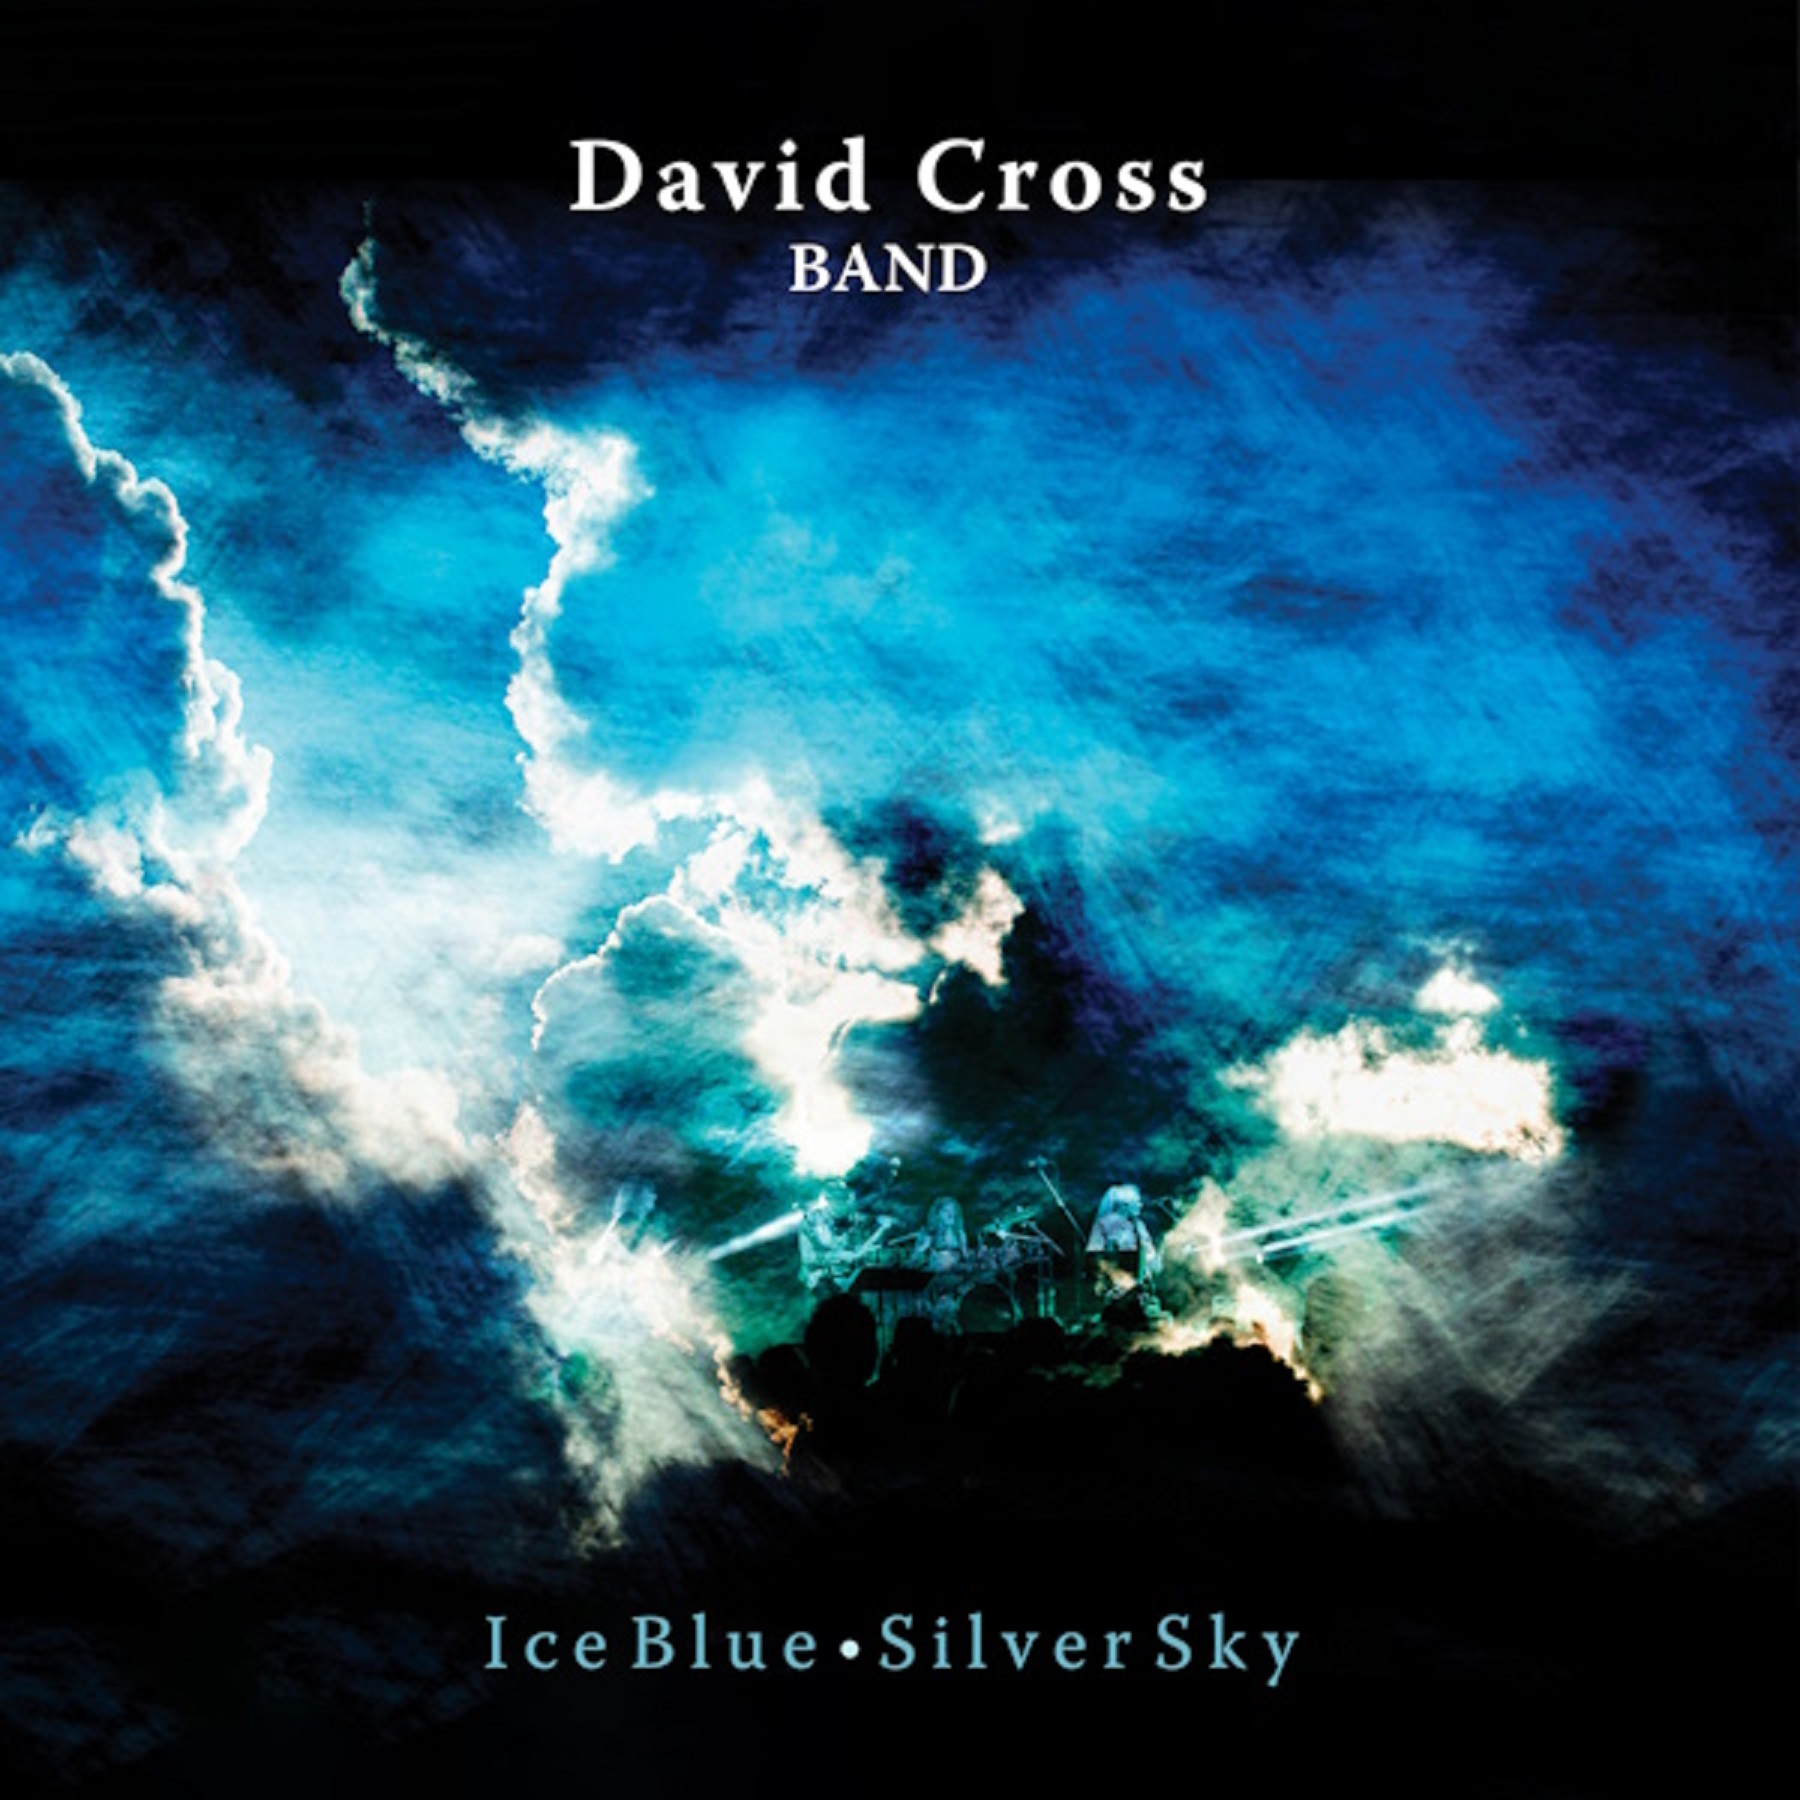 Ex-King Crimson Violinist David Cross Announces the Release of New Studio Album “Ice Blue, Silver Sky” OUT NOW!